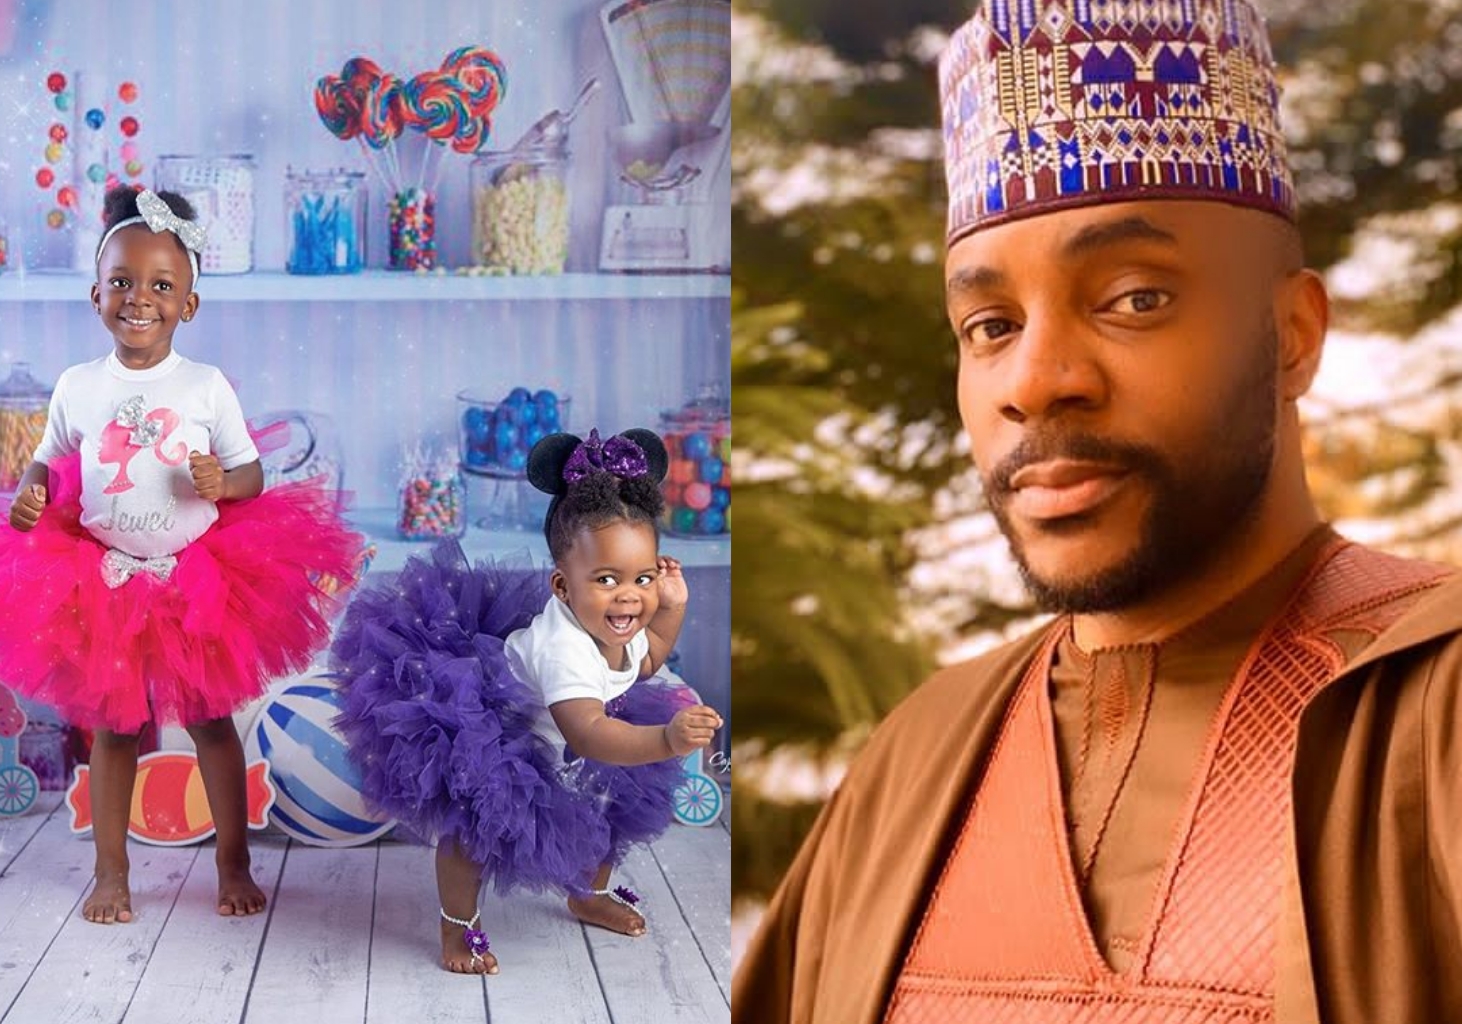 BBNaija Host and TV Personality Ebuka cries out as he's children breaks his jump rope (Photo)